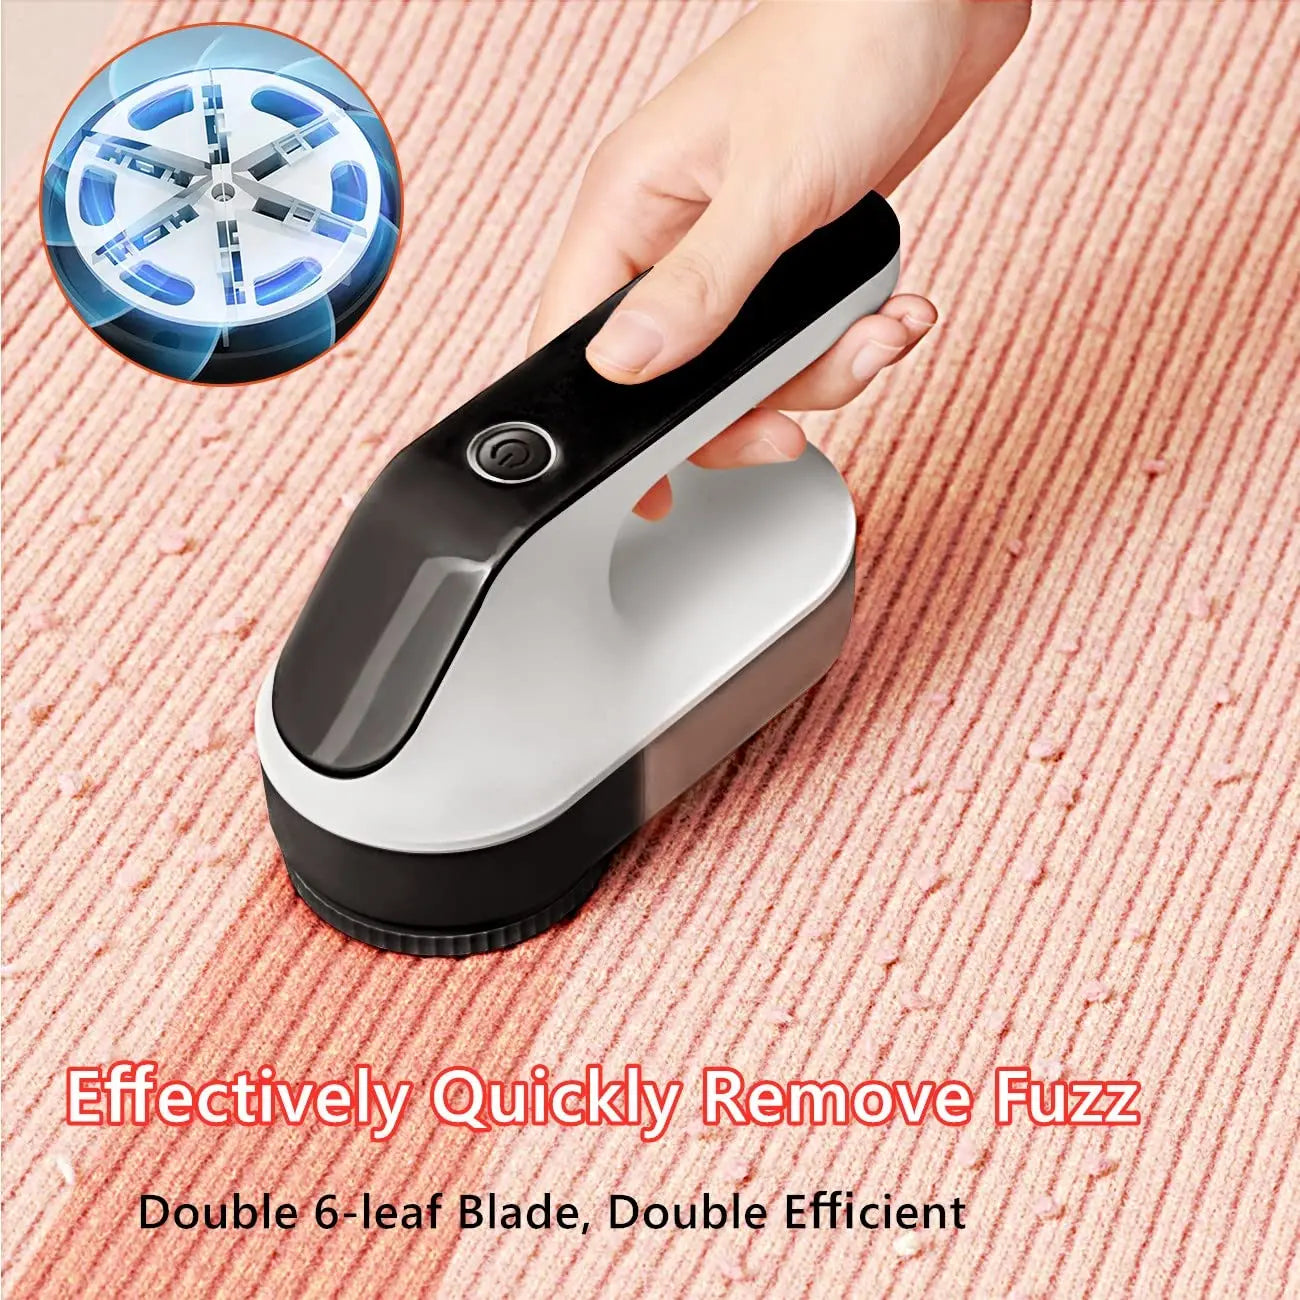 Portable Electric Lint Remover Clothes Fluff Pellet Remover Trimmer Machine Rechargeable Fabric Shaver Removes Home Appliance